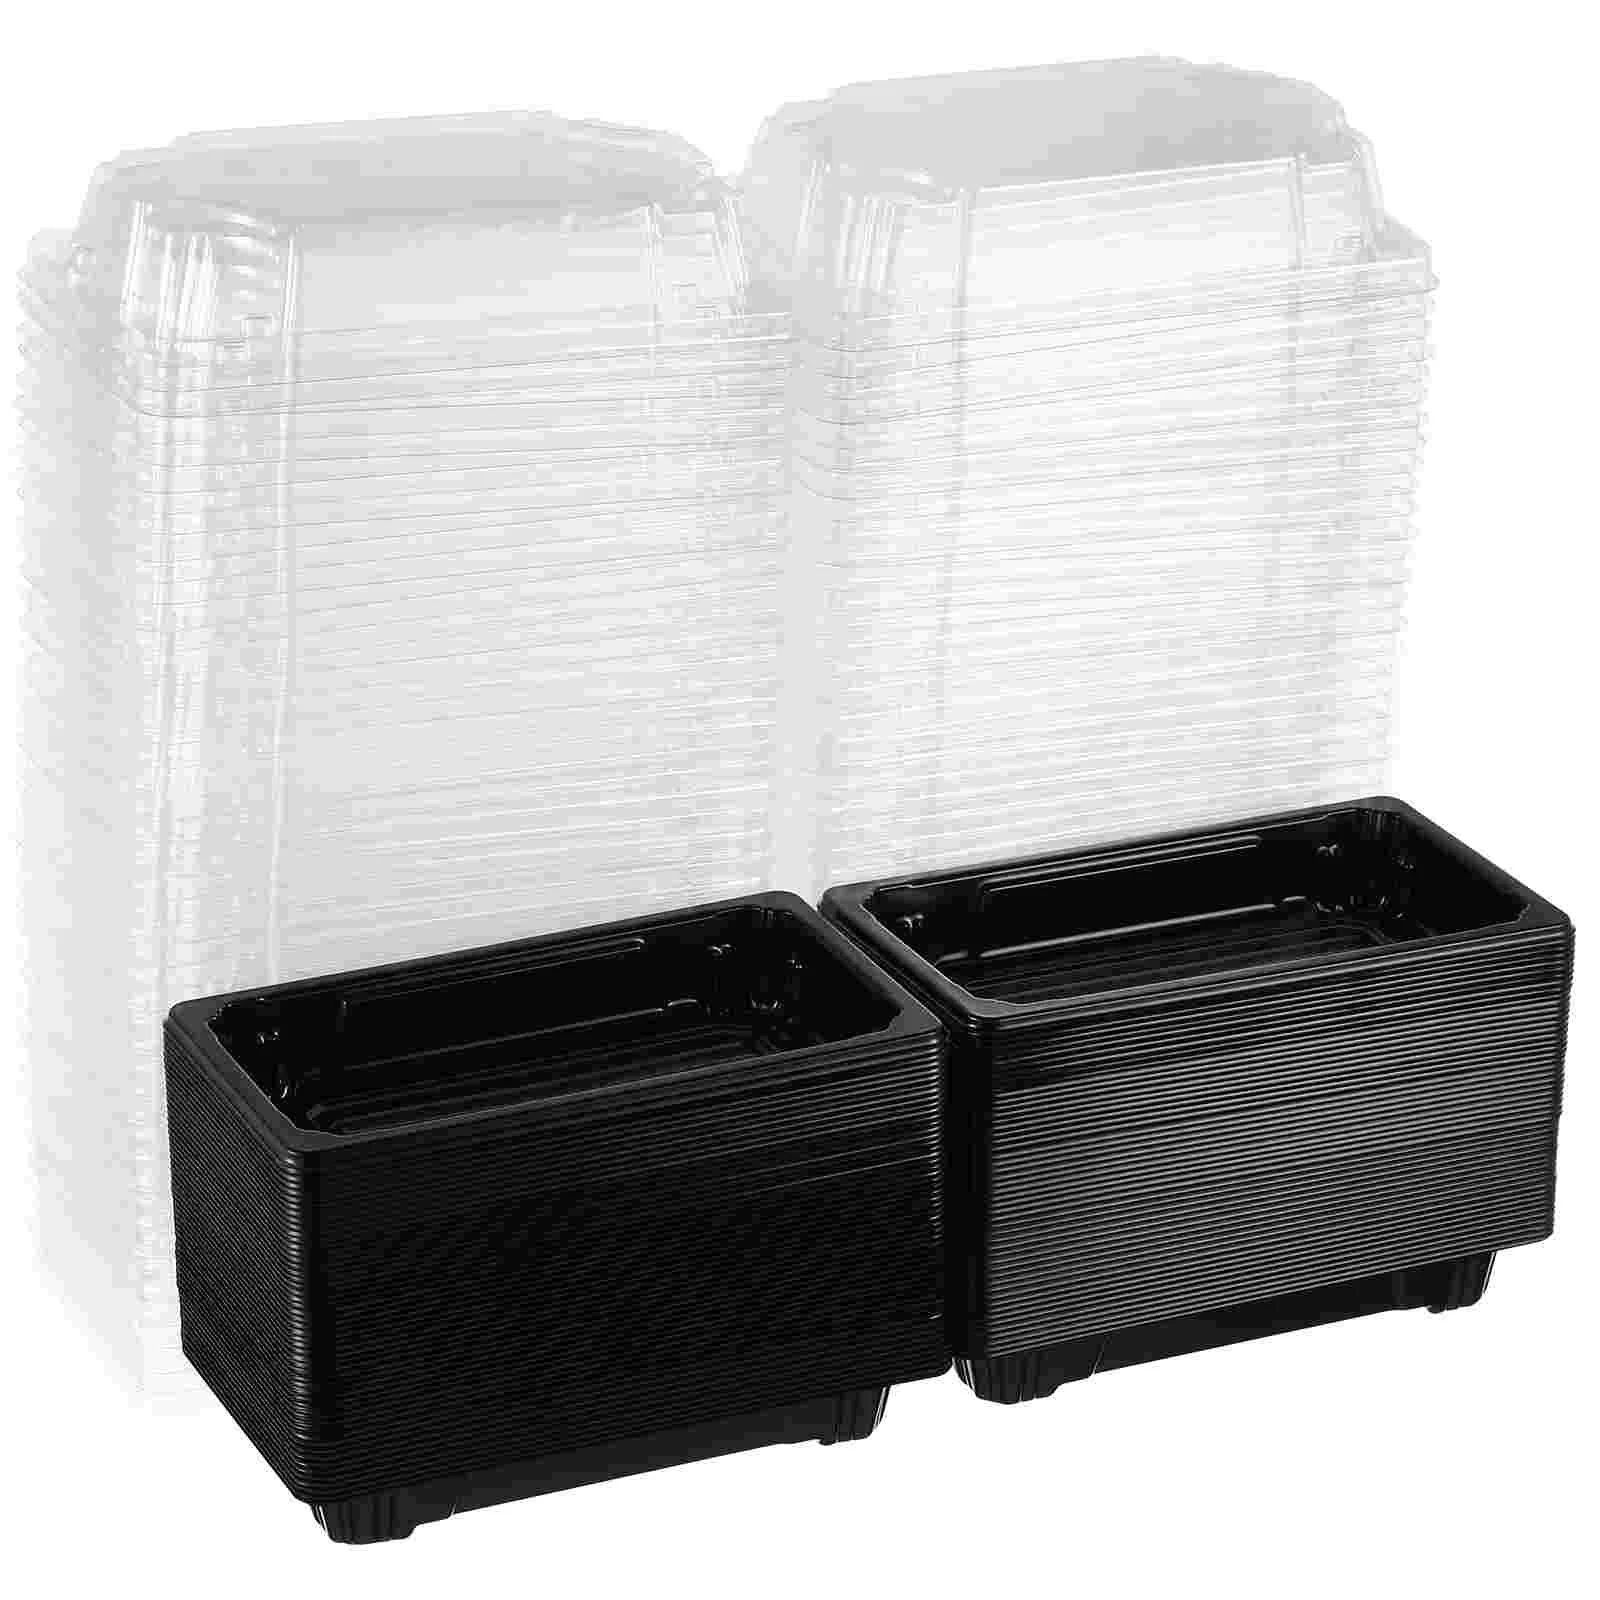 

100 PCS Food Tray Take Out Boxes Disposable Pulp Containers with Cover Carry Fruit Packing